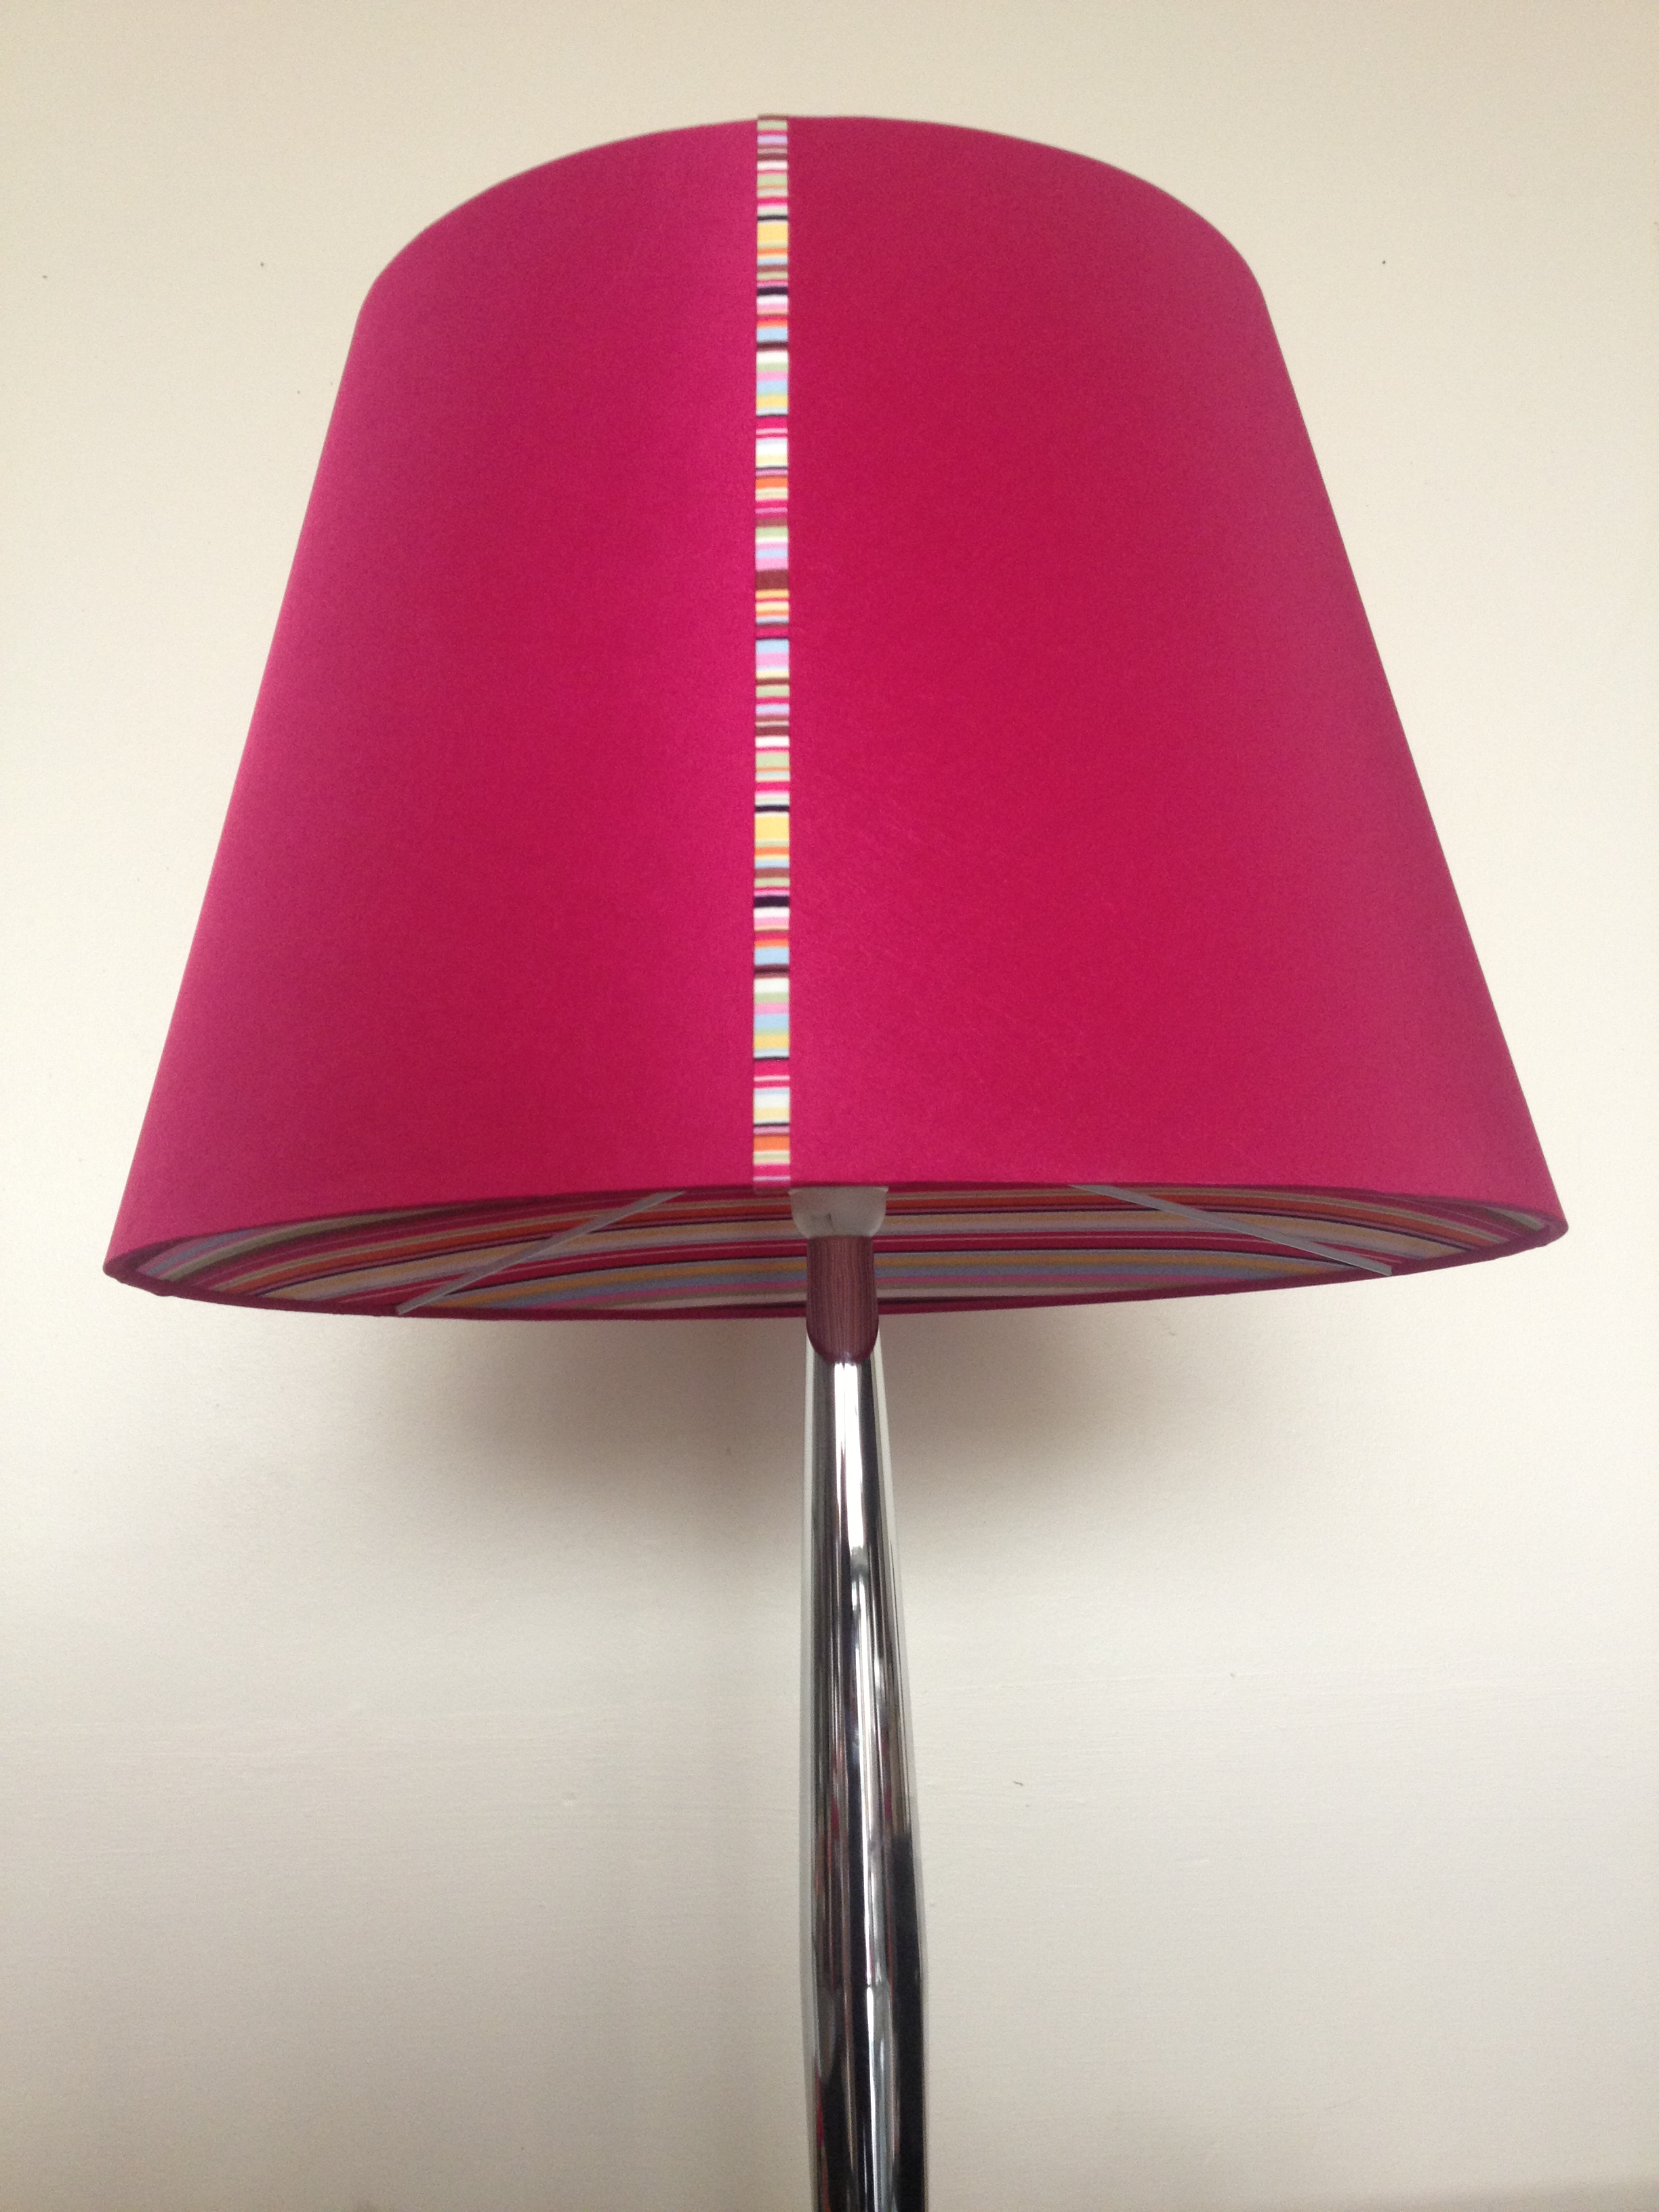 Shocking Pink table lampshade by feature-lighting.co.uk